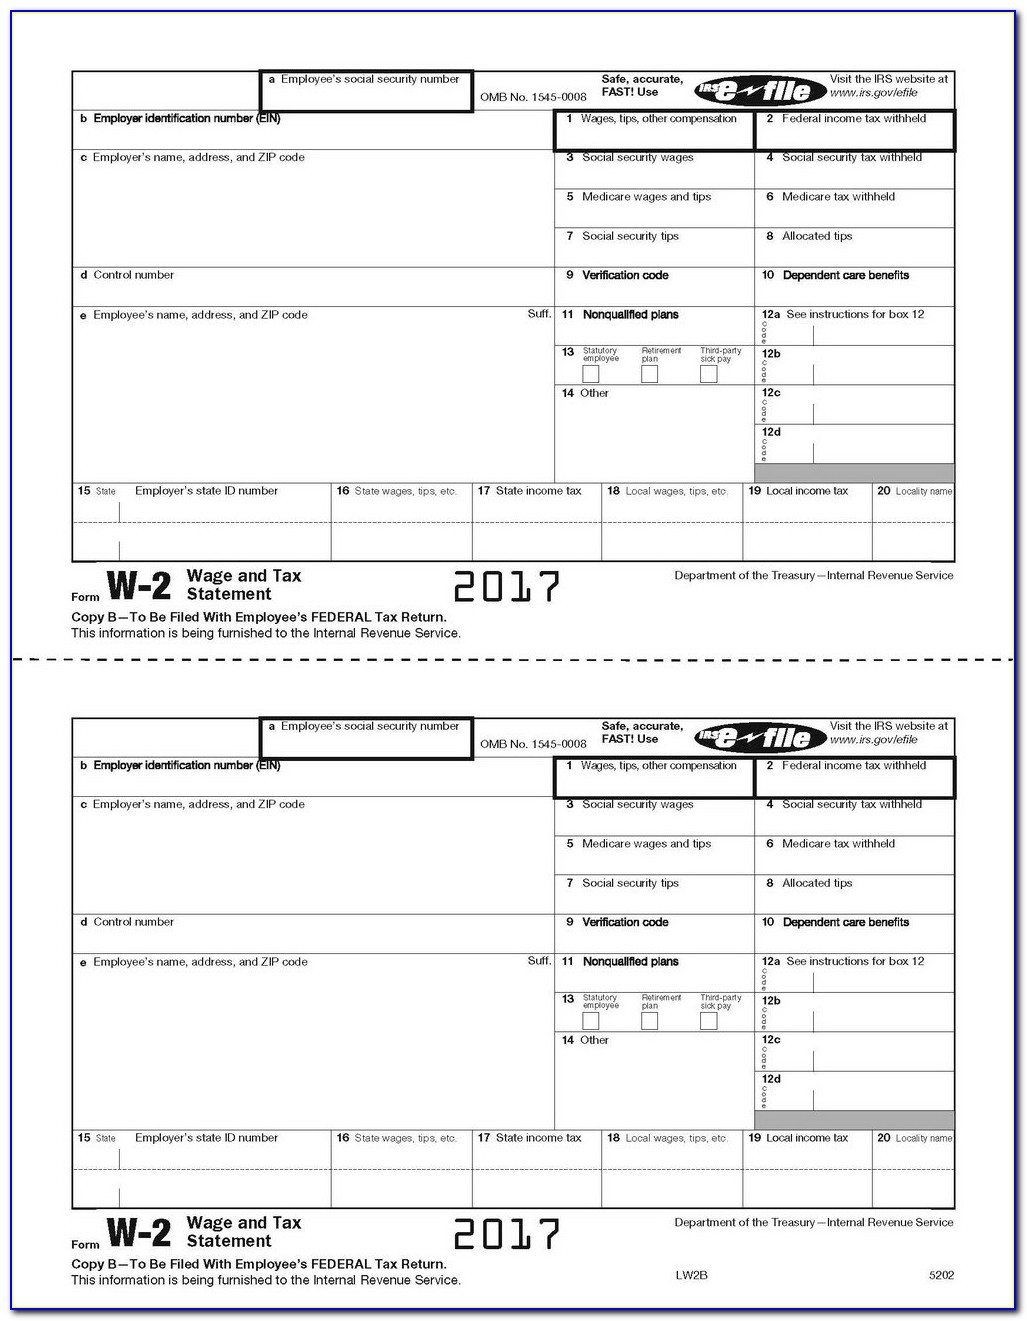 Cms 1500 Fillable Form Software